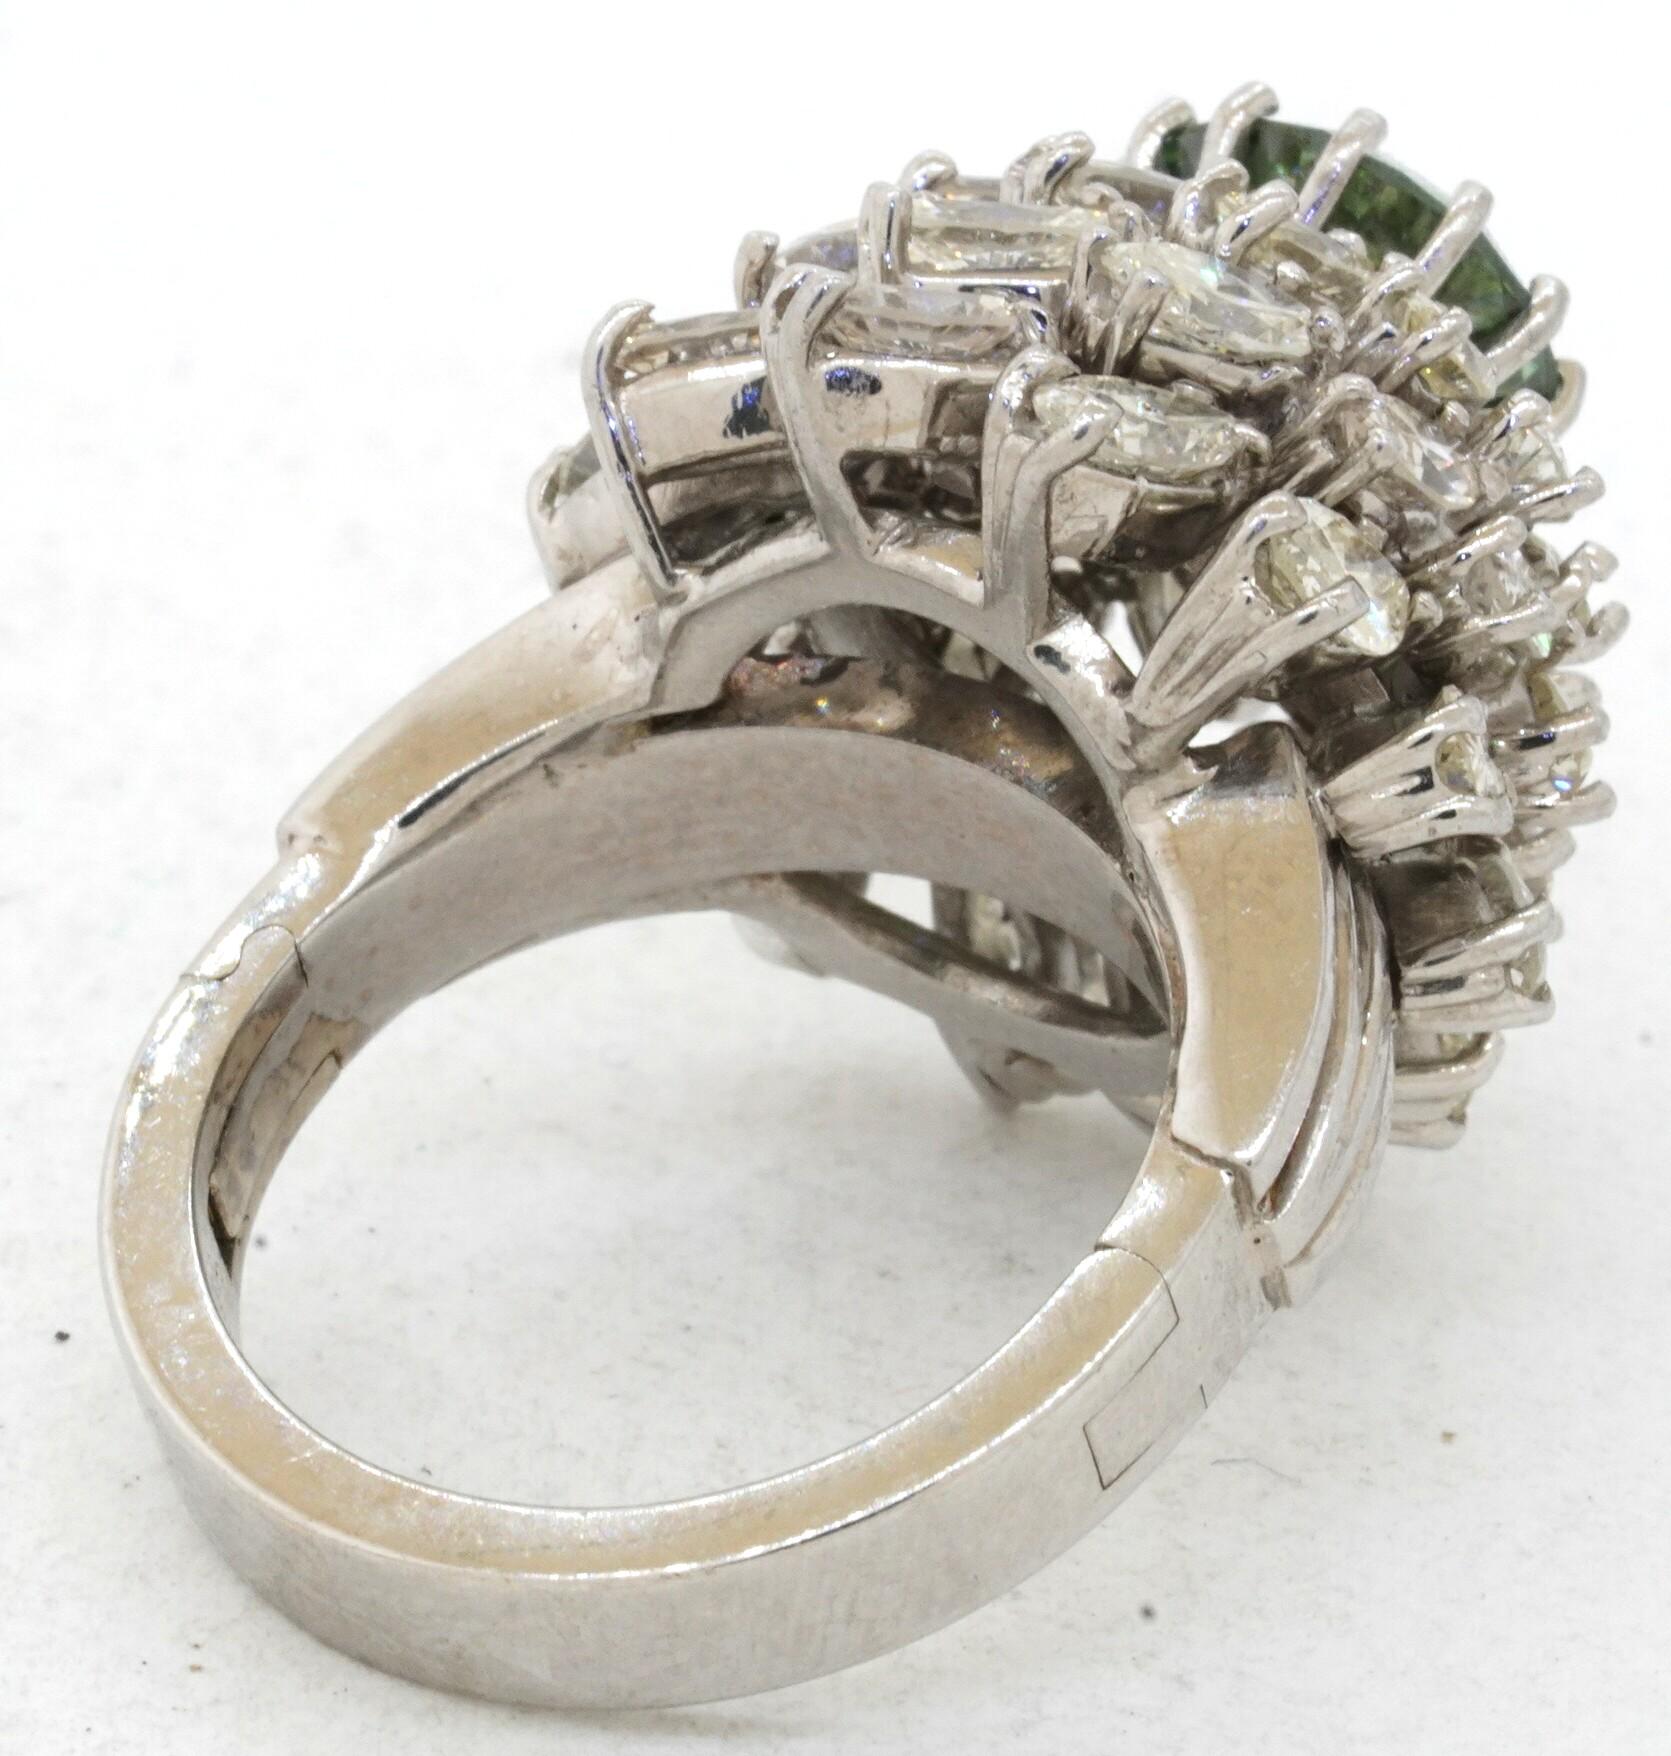 Heavy Platinum 7.76CT VS Fancy Green diamond cluster Ballerina ring size 7. This extraordinary piece of jewelry is crafted in gorgeous Platinum and features 37 diamonds with a combined weight of approx. 7.76CT. This includes an approx. 2.60CT center